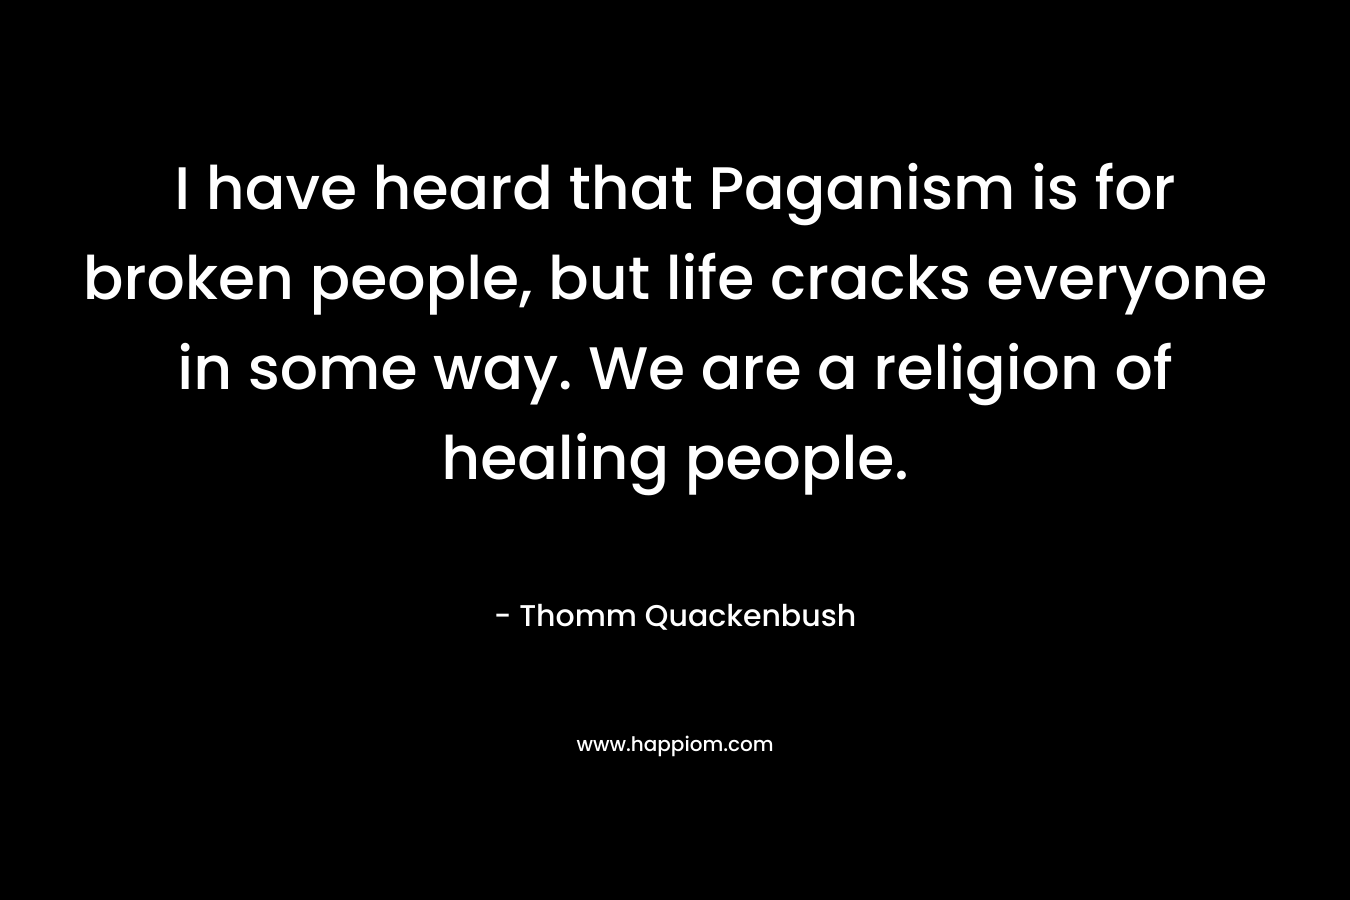 I have heard that Paganism is for broken people, but life cracks everyone in some way. We are a religion of healing people.